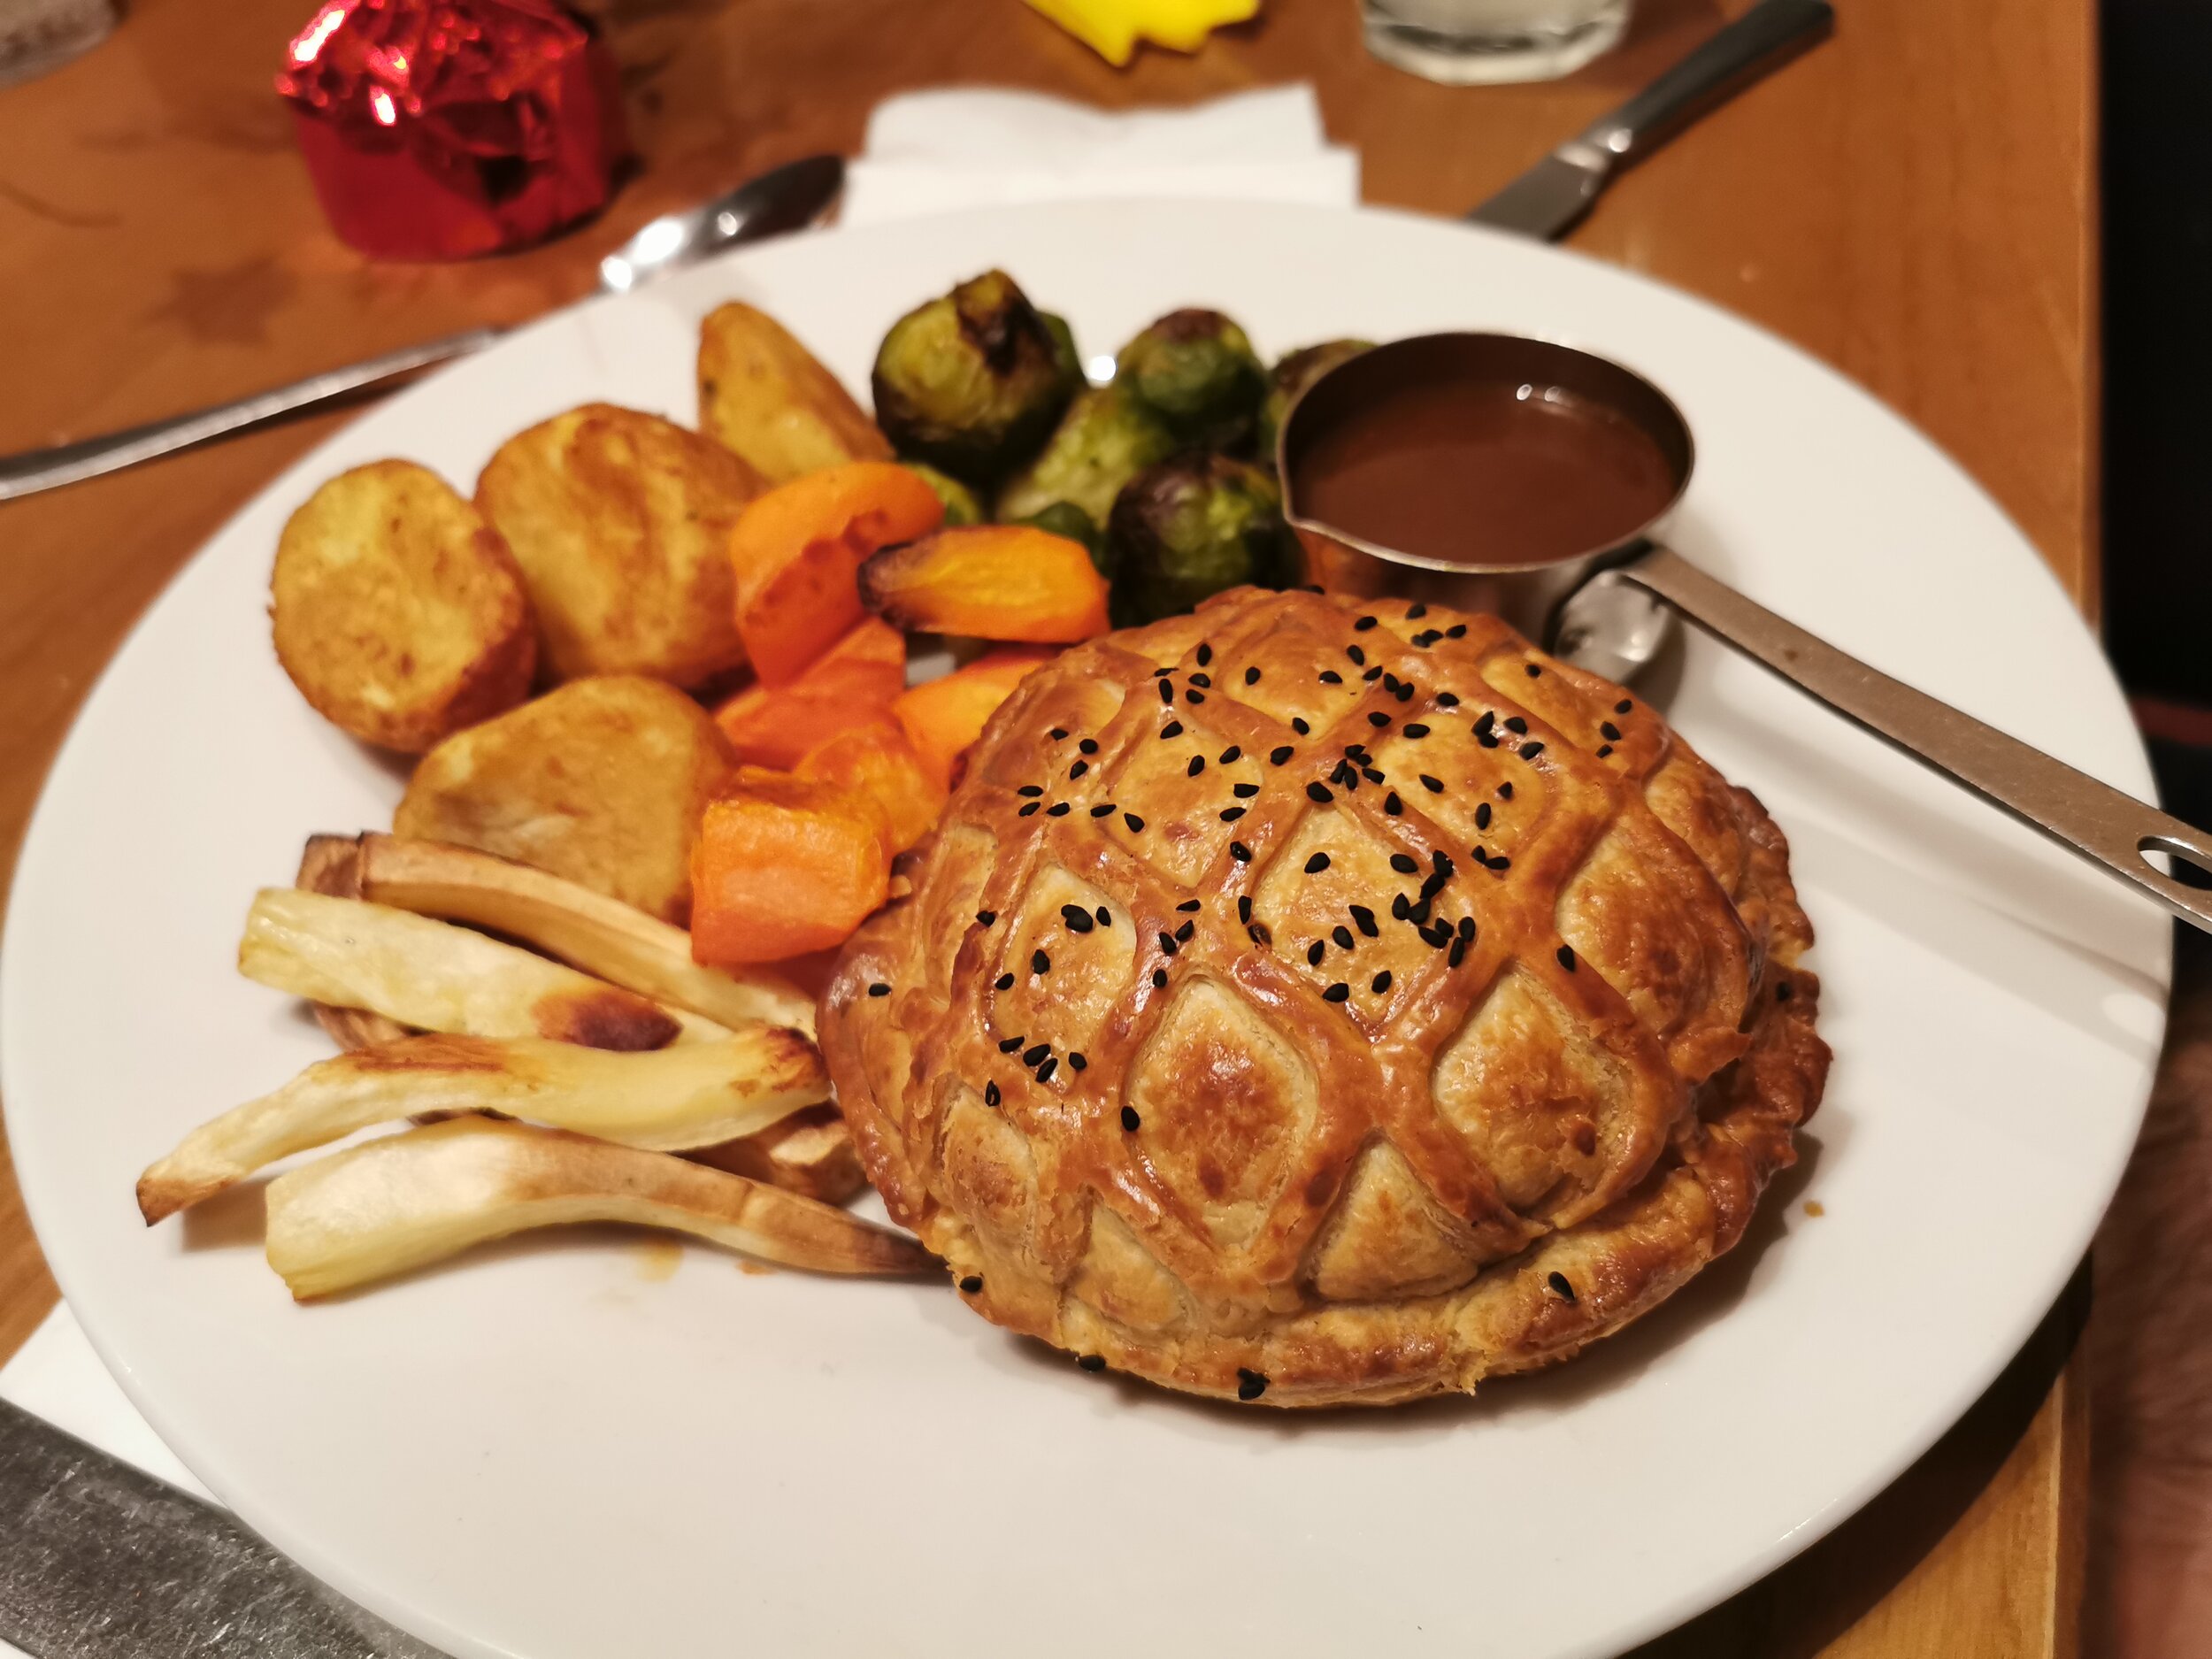 Vegan Wellington: butternut squash, sage &amp; caramelised onion wrapped in flaky pastry, served with seasonal vegetables, roast potatoes and vegan gravy